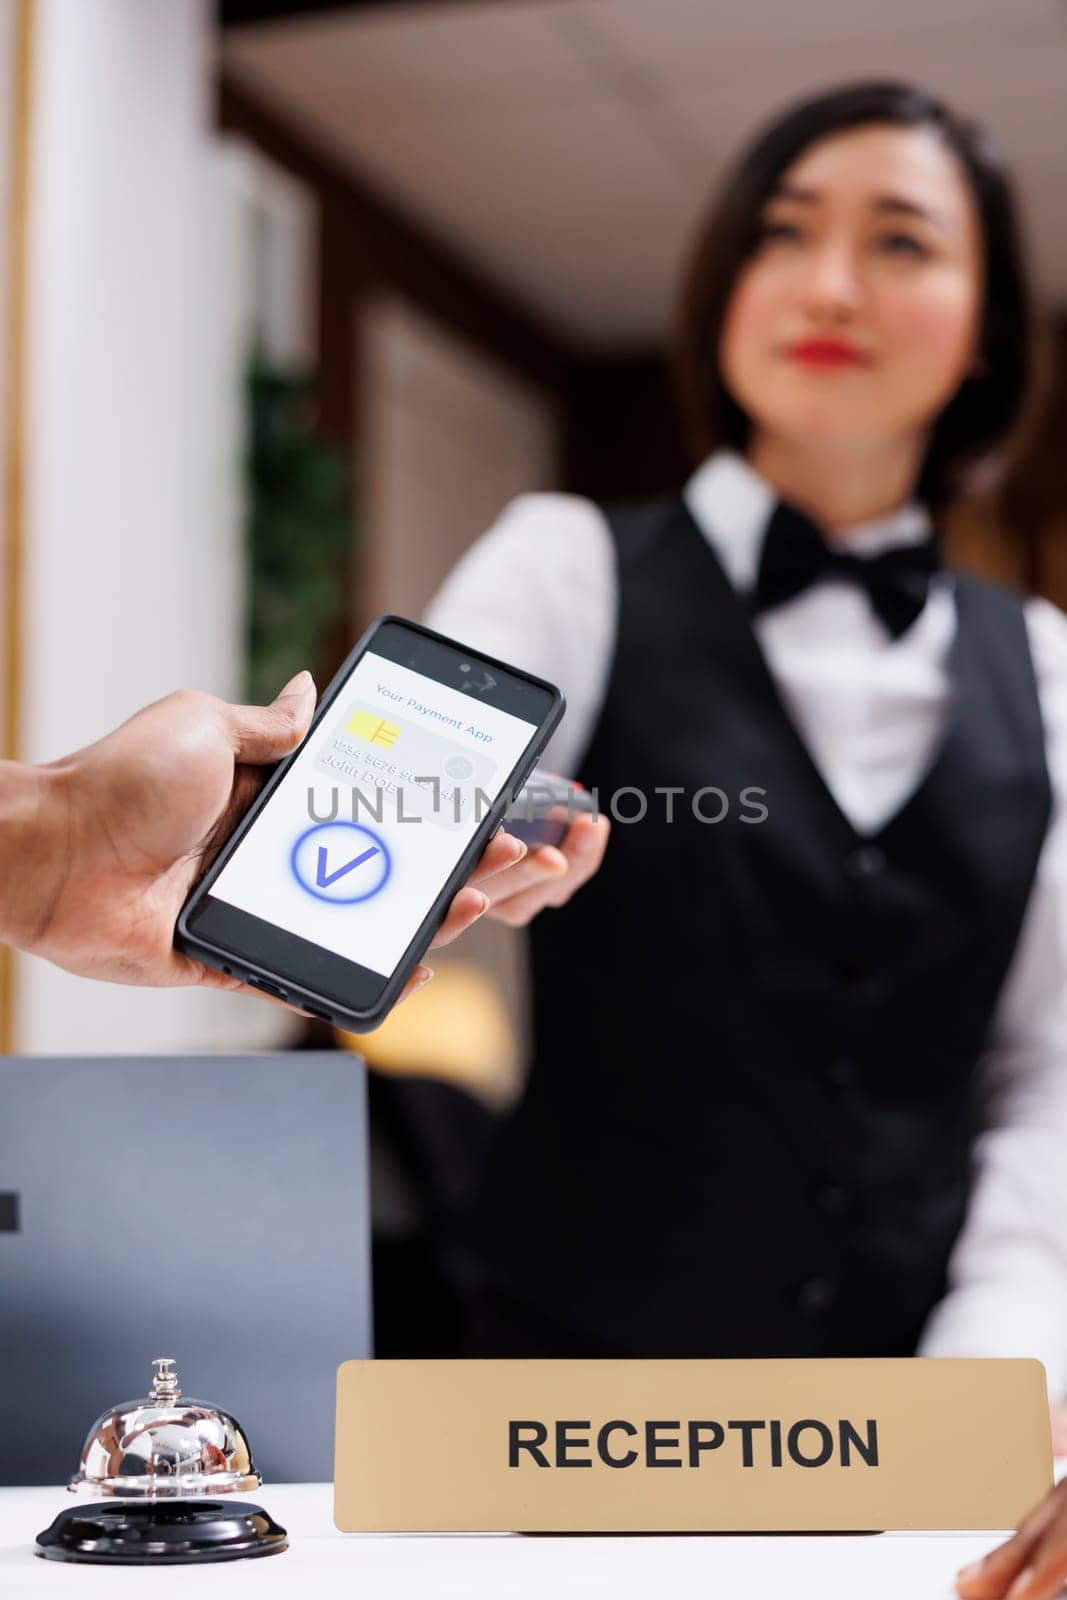 Man paying with mobile phone and nfc at pos terminal, receptionist helping people with check in process. Asian front desk staff welcoming guests, adult making payment for room. Close up.